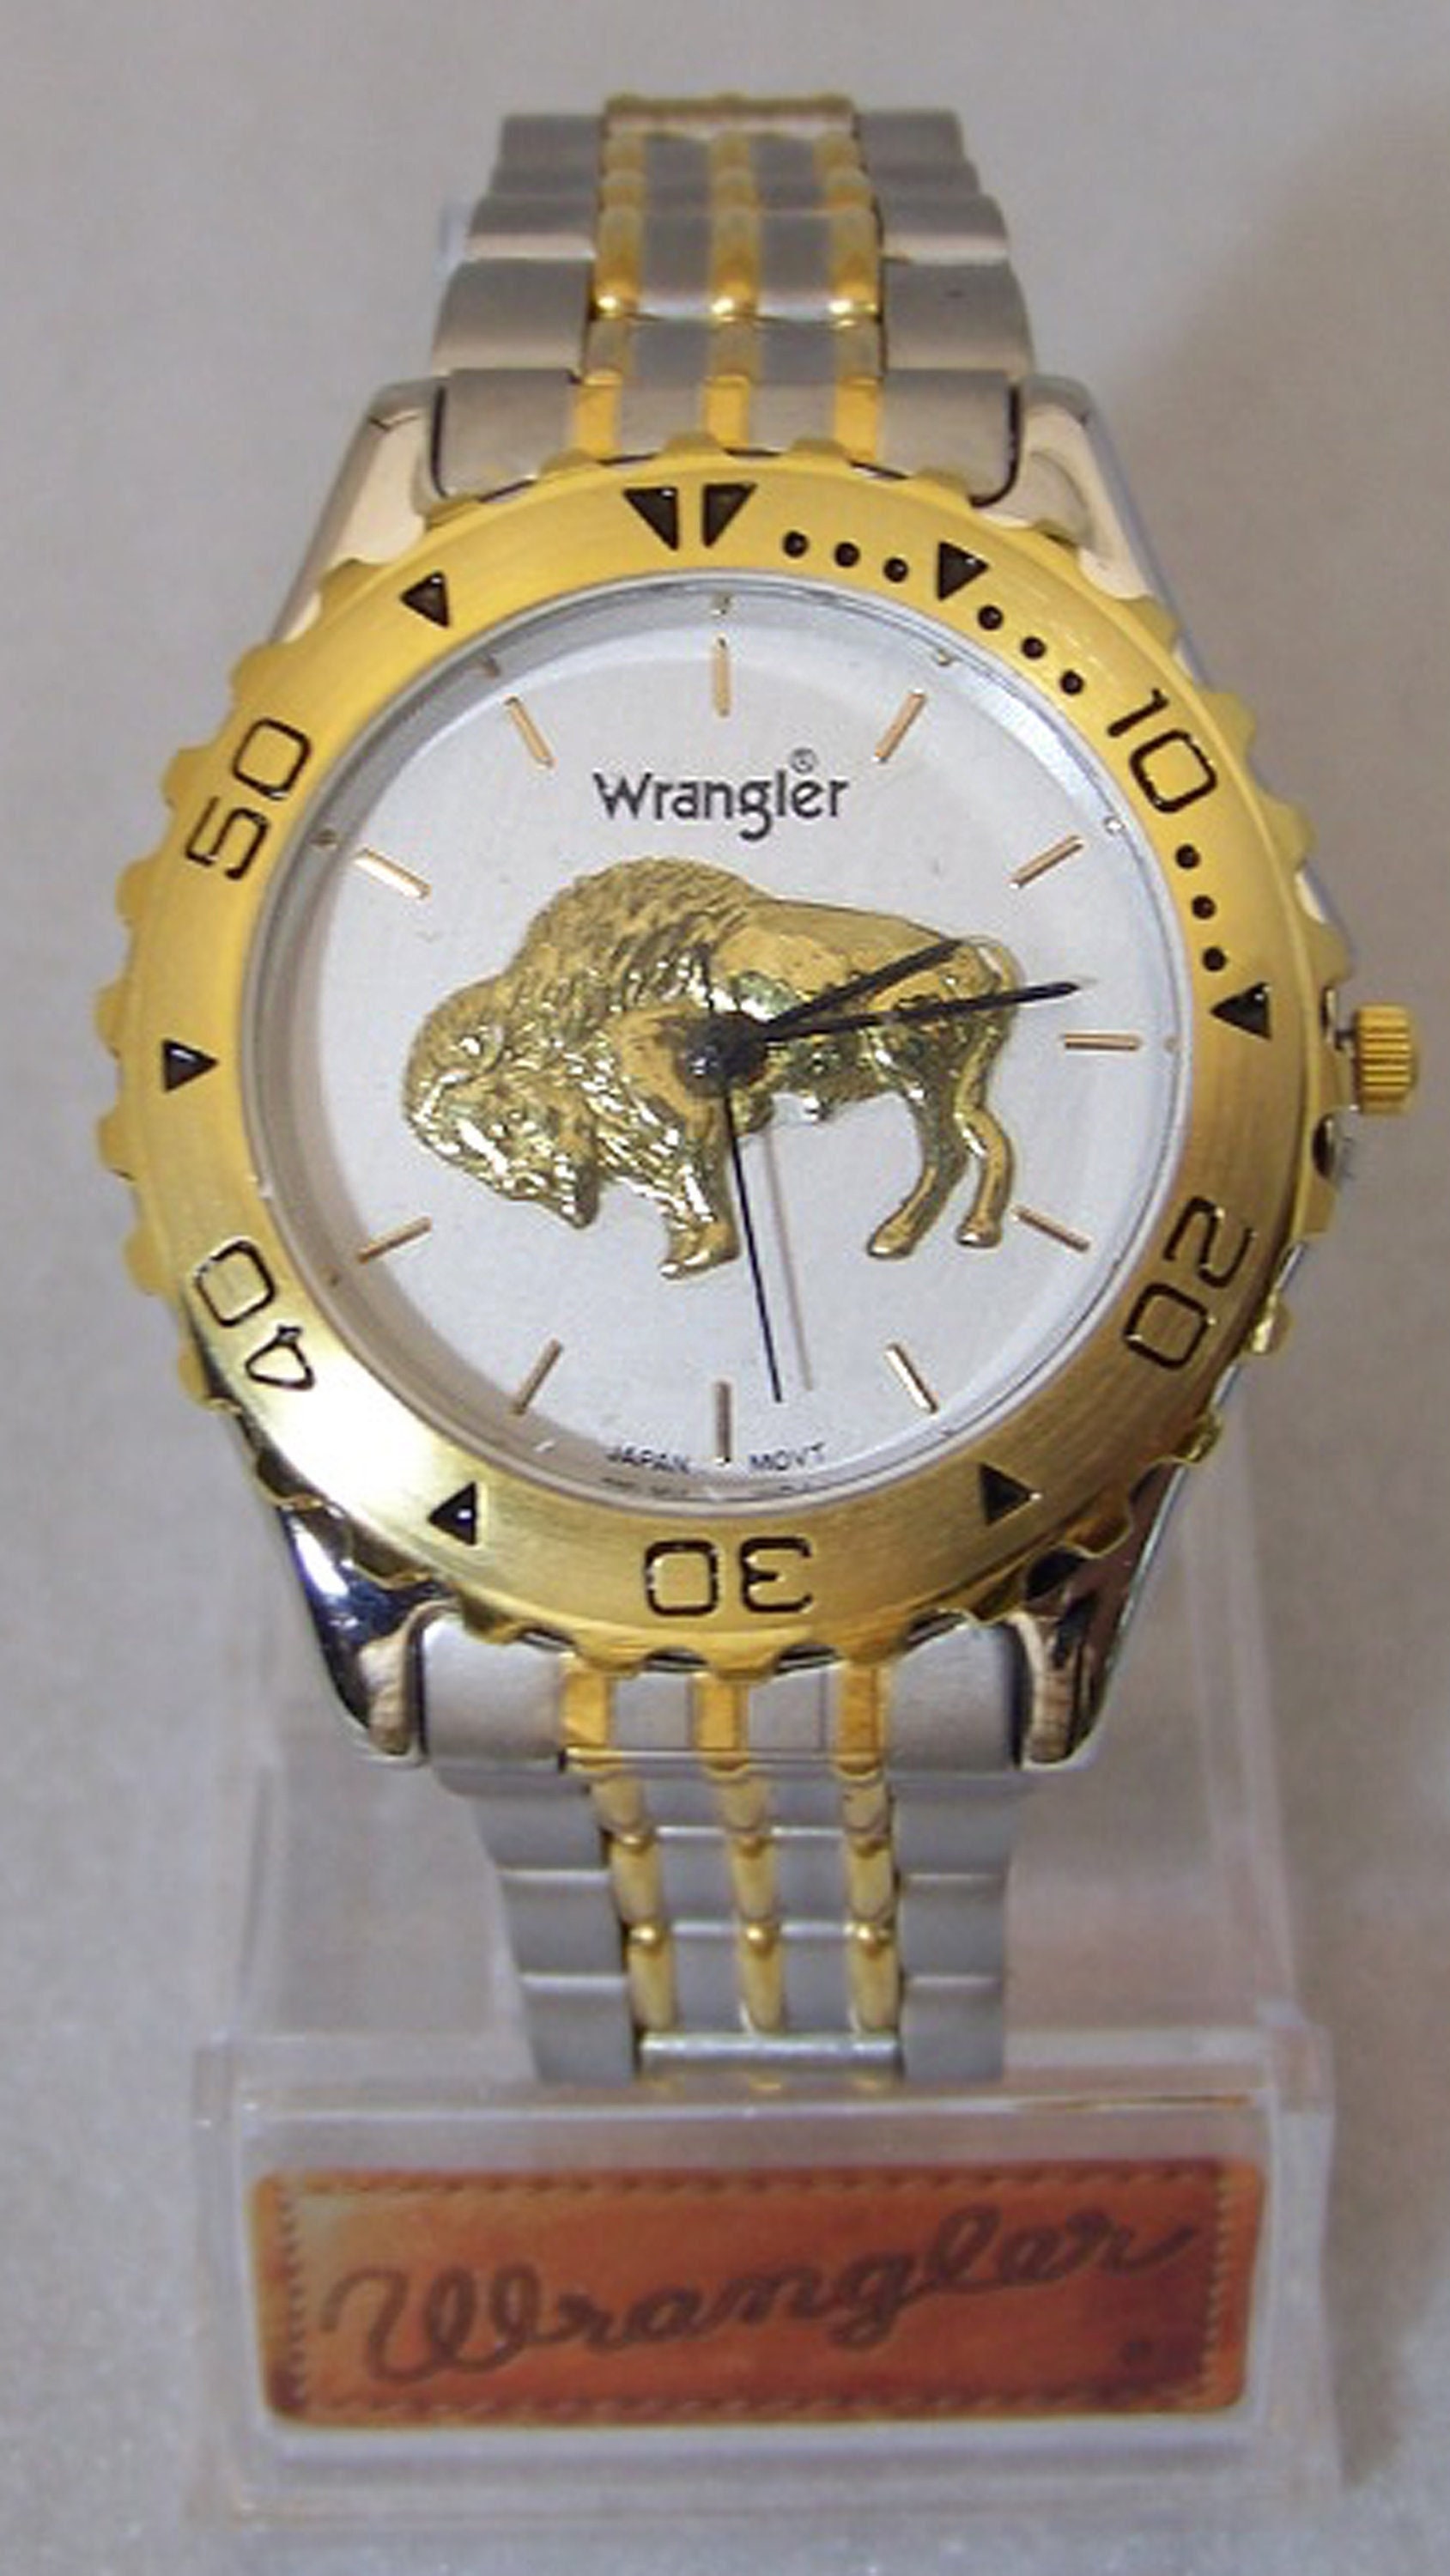 Wrangler Buffalo Watch Mens Stainless Steel Wristwatch with Gold Bison